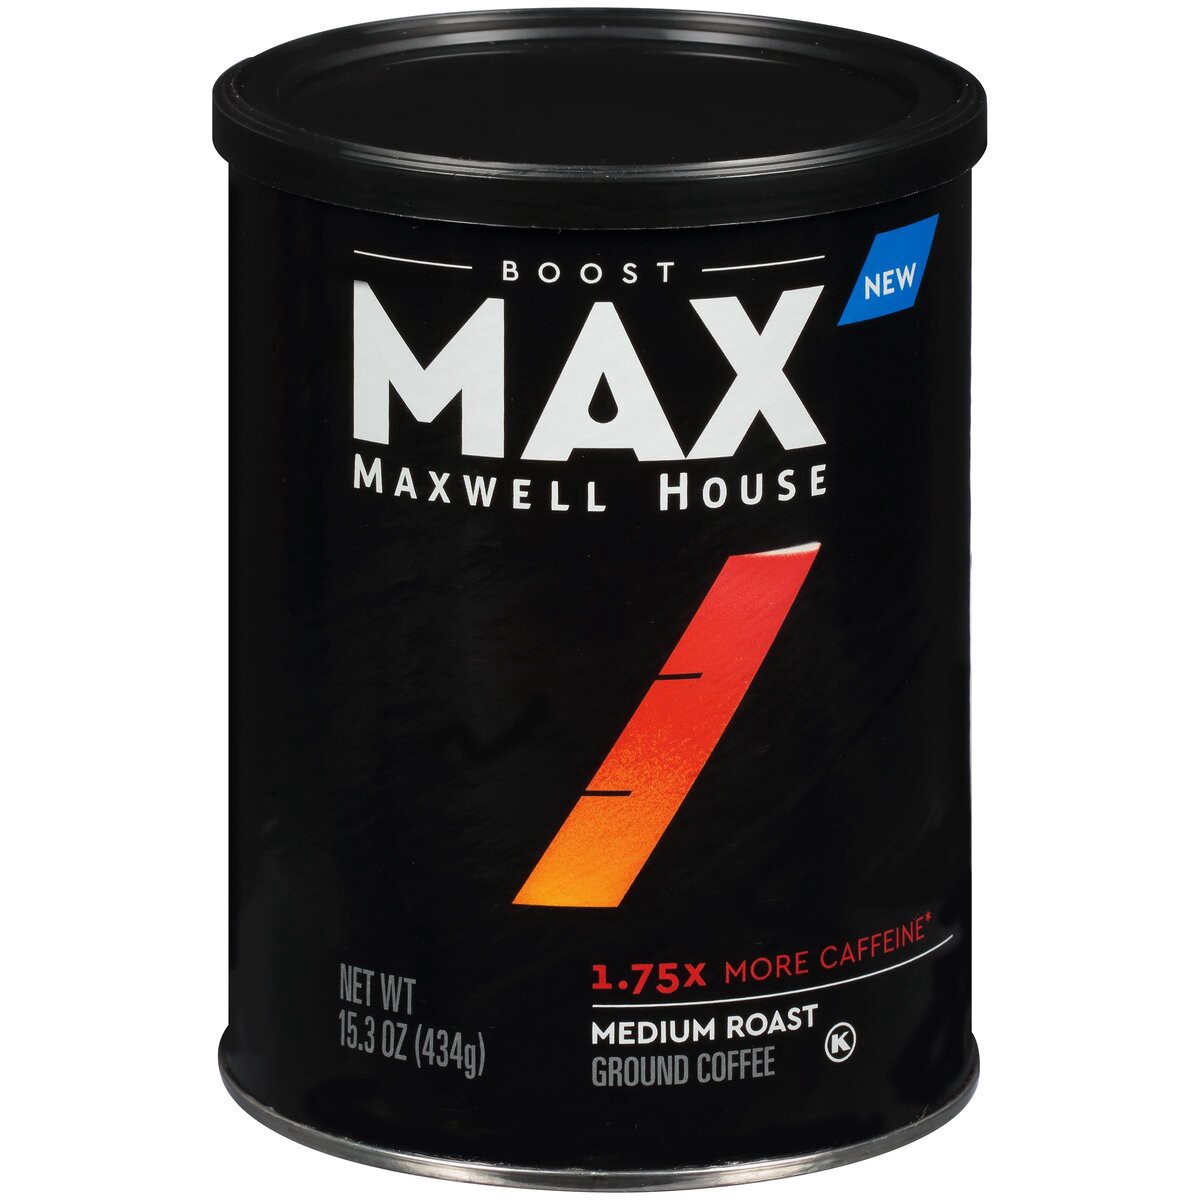 slide 1 of 7, Maxwell House Max Boost Medium Roast Ground Coffee with 1.75X More Caffeine ister, 15.3 oz